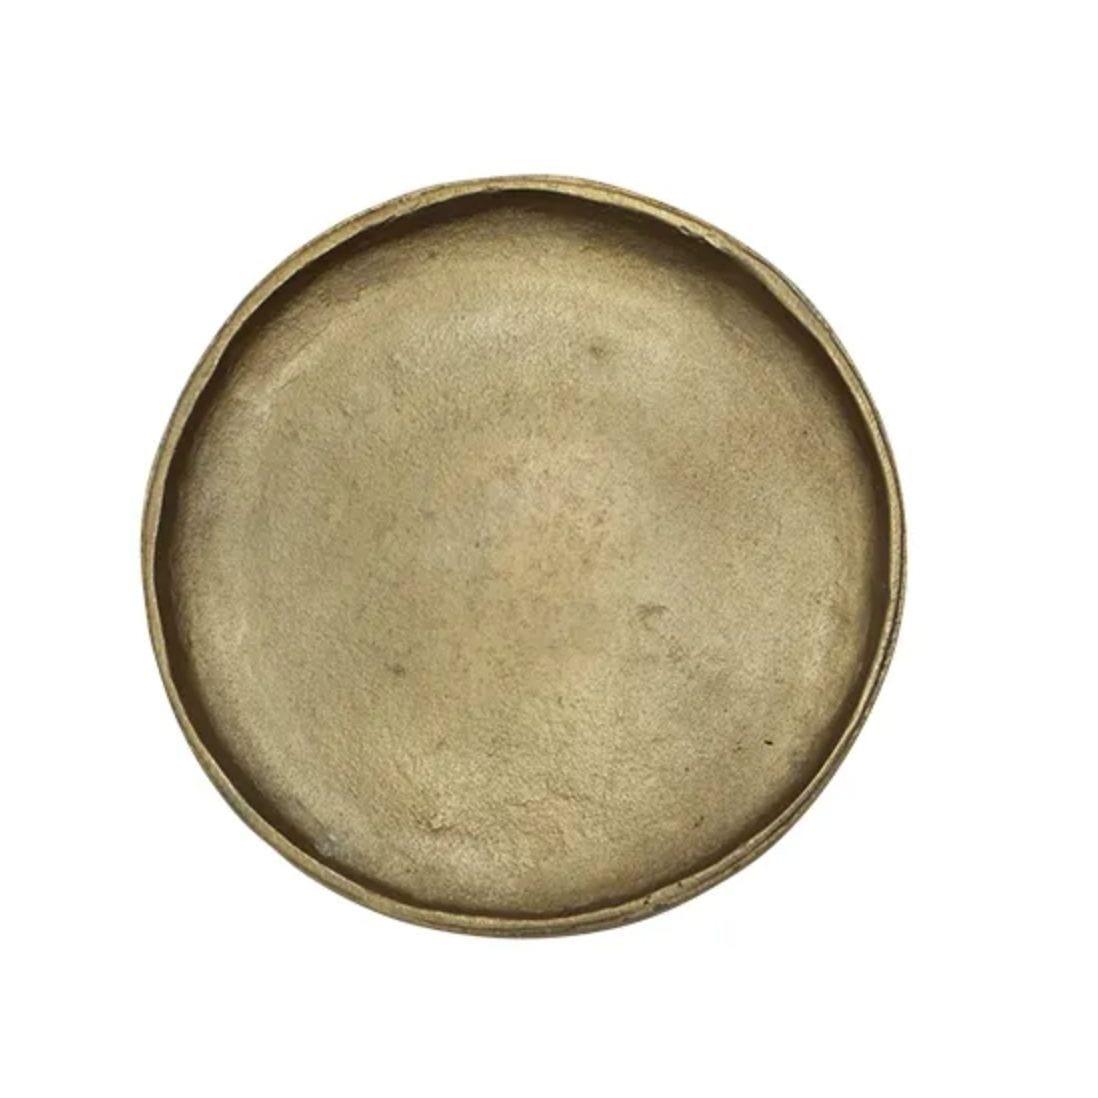 Hand Forged Brass Plate - Large House of Dudley